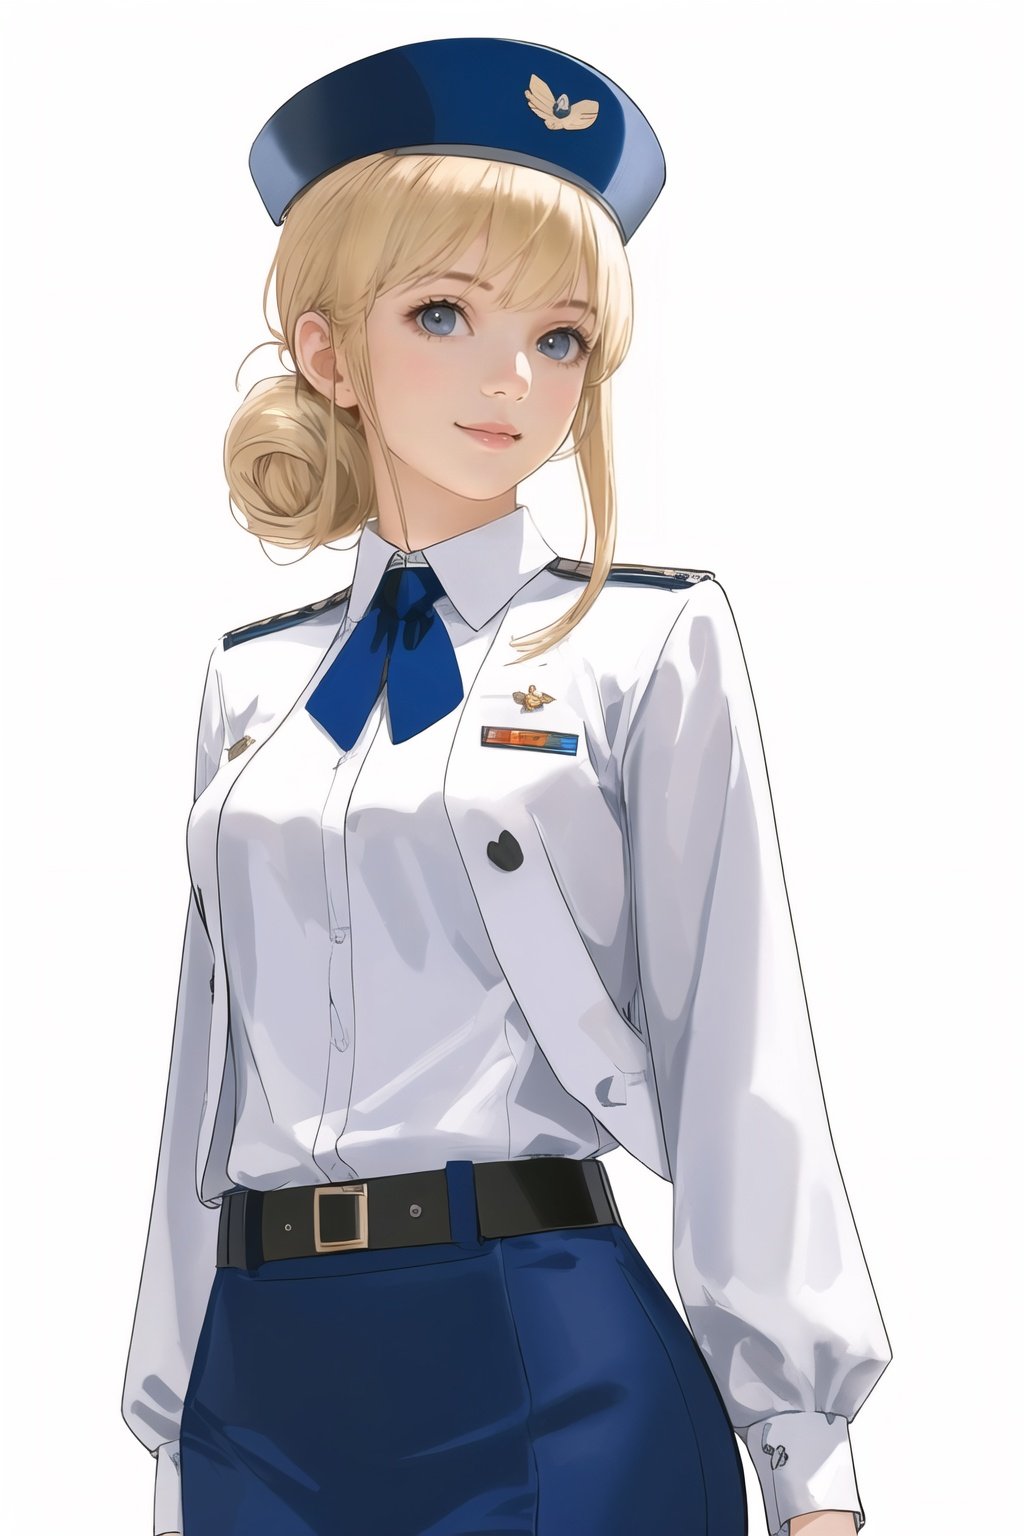 stewardess woman,21 years old,(white background:1.3),(upper body:1.2),subsurface scattering,smiling,hair bun,blonde hair,bangs,stewardess,dark blue uniform,garrison cap,pantyhose,white gloves,(airplane cabin),light smiling,((best detailed slender body)),(european idol, european beauty, european mixed),(wide hip:0.7, large breasts:0.8, perfect slender young girl body),(tall_image:1.3),Perfectly glossy skin,picture of a vivid,(masterpiece:1.2),(extremely detailed),(8k:1.1),(perfect lighting,best quality,highres,original),(realistic photography:1.4),(tall image:1.5),high detailed skin,shaded face,soft lighting,(small face),shiny_and_glossy_skin,RAW,ultra highres,pores visible,(ultra realistic quality,highres,original),(realistic:1.4),(tall image:1.5),high detailed skin,shaded face,soft lighting,(small face),shiny_and_glossy_skin,tone abs,depth of shadow